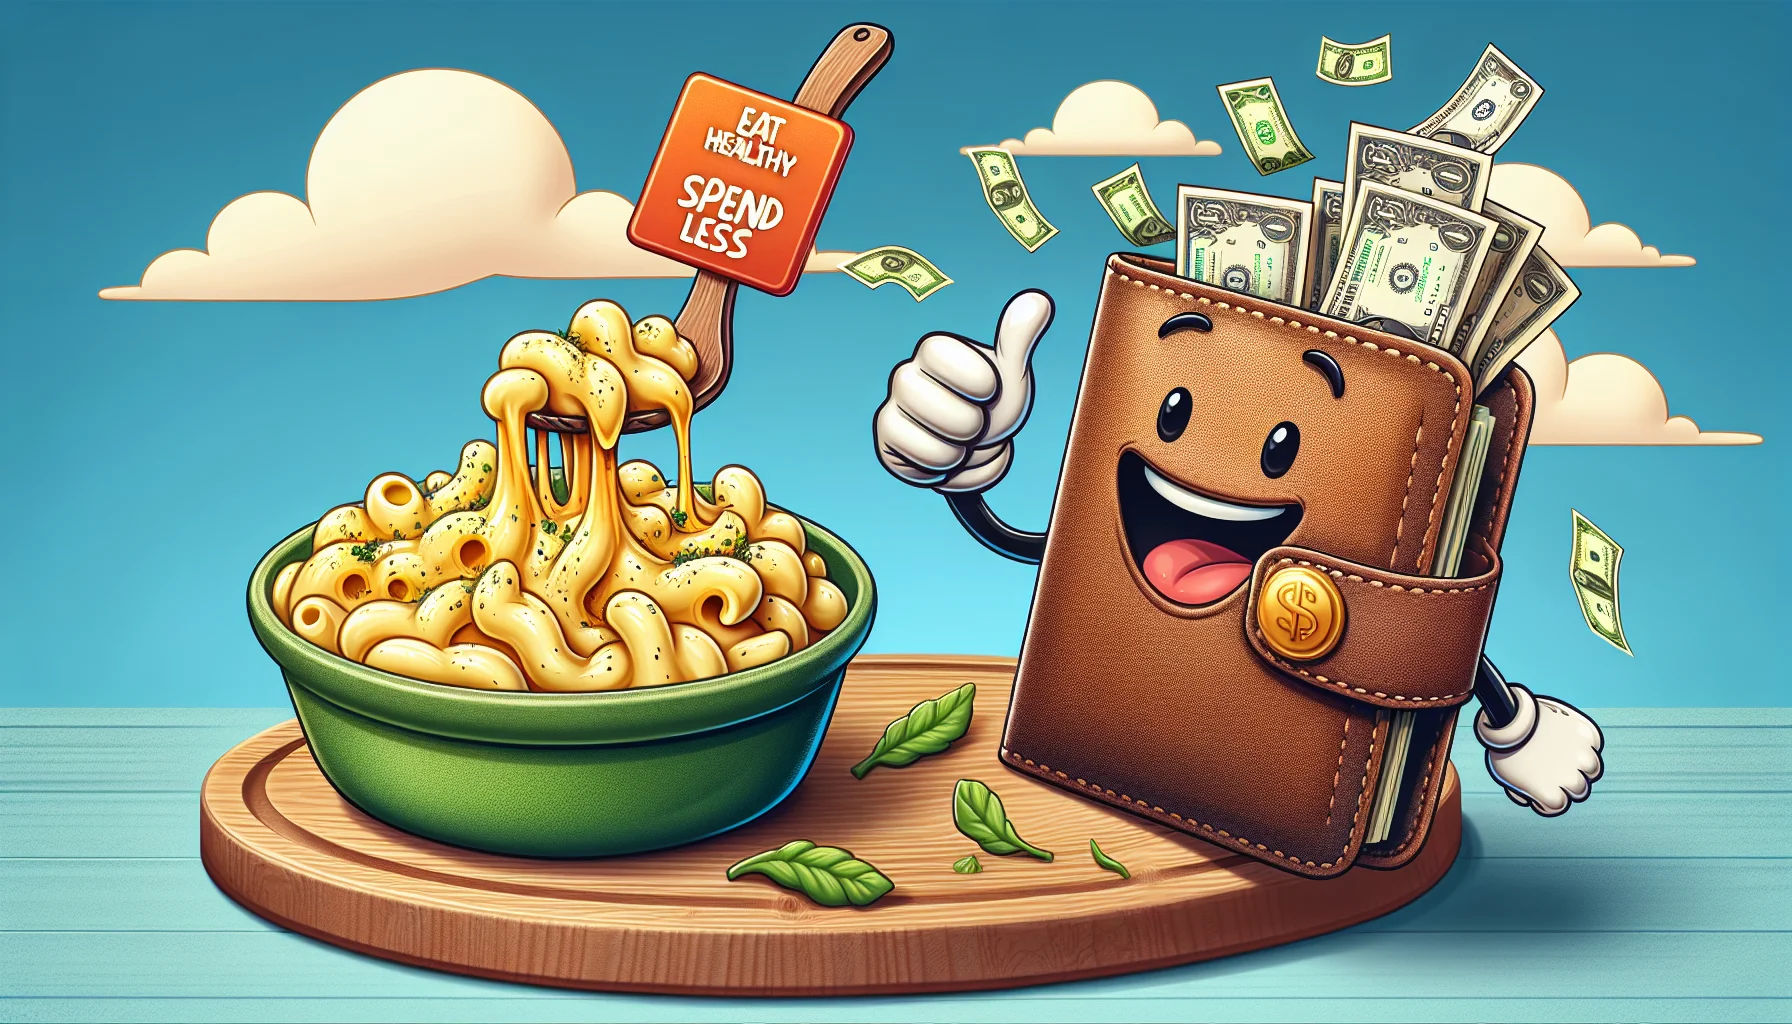 Craft an amusing, wholesome image of a homemade Mac & Cheese, oozing with cheese and adorned with a sprinkle of herbs, served on an eco-friendly wooden plate. It's placed next to a brightly colored price tag showing a surprisingly low cost. A cartoon-style banner flies across the sky, with the text 'Eat Healthy, Spend Less.' Completing the image is an anthropomorphic wallet, grinning widely and giving a thumbs-up, which personifies the concept of saving money while having wholesome food. Add a dash of humor by incorporating small bill-notes fluttering out of the wallet, symbolizing the money saved.